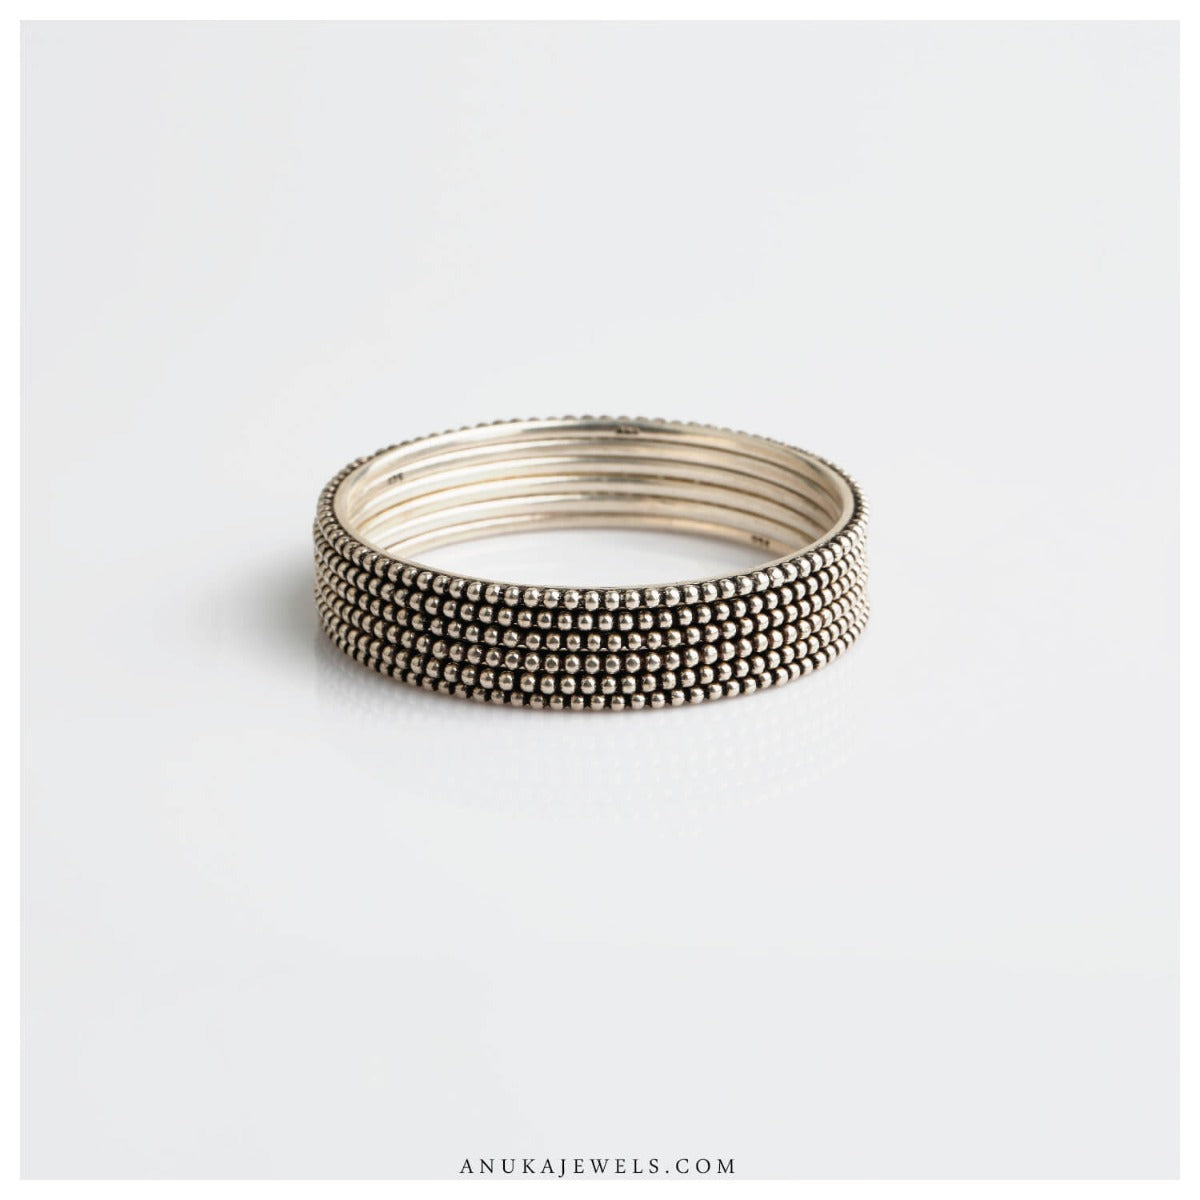 Appealing oxidized silver bangle for kids